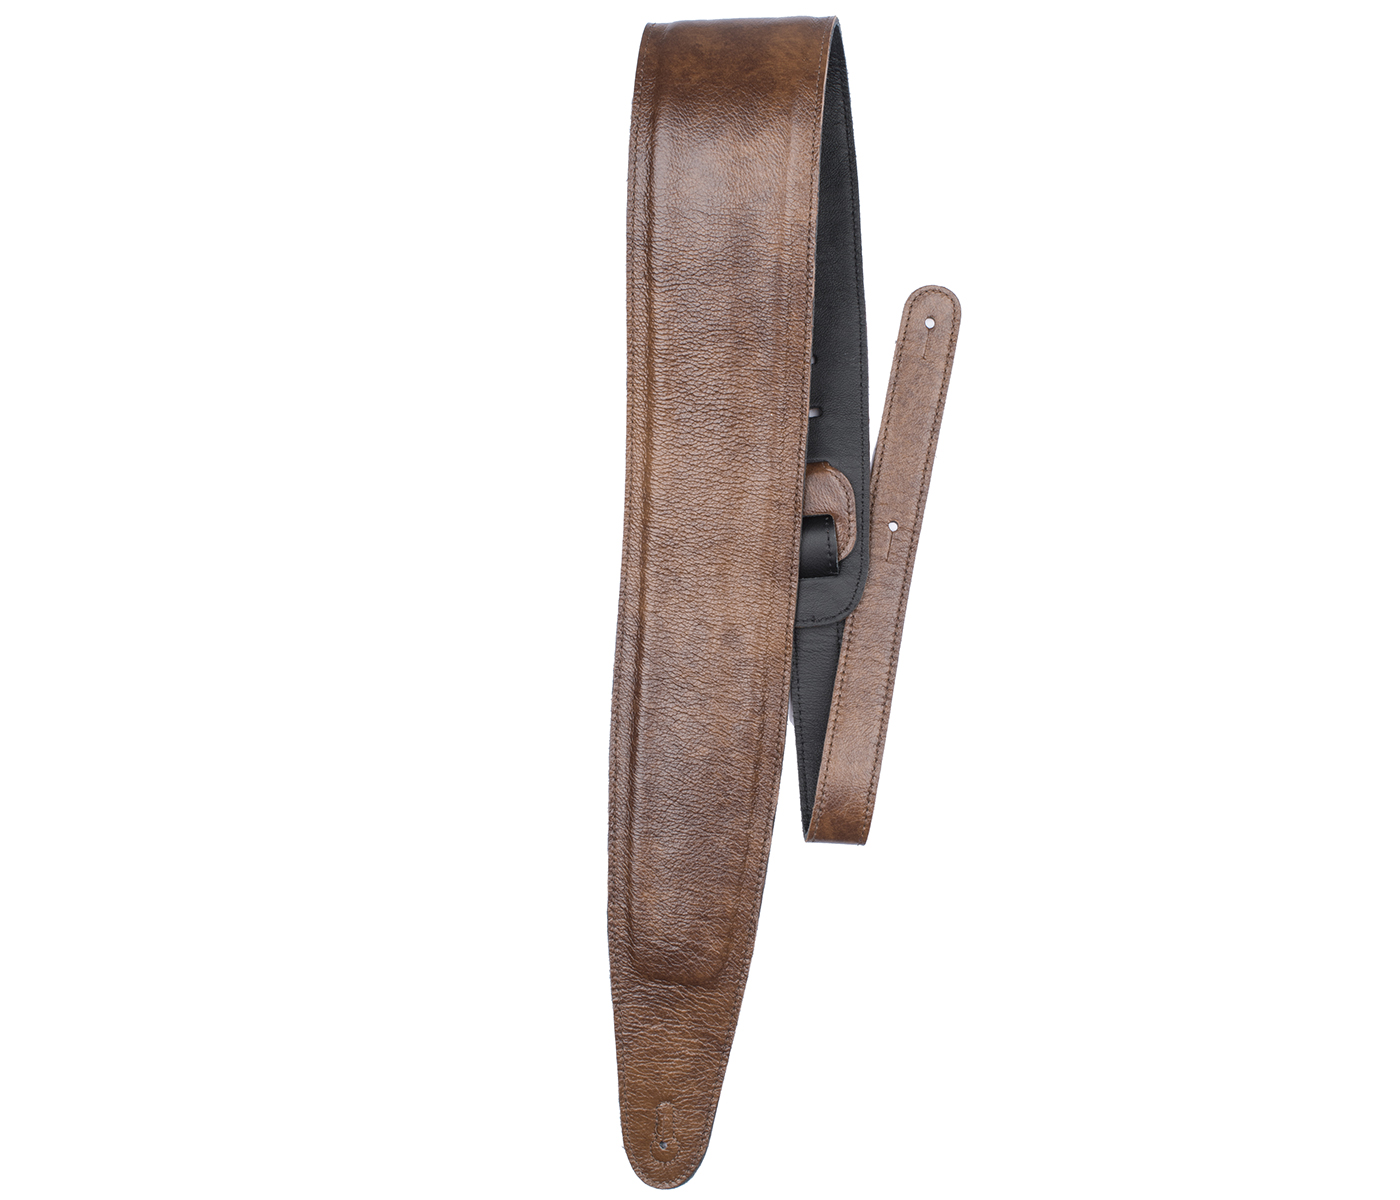 PERRIS 3,5" PADDED ITALIAN LEATHER GUITAR STRAP CHESTNUT